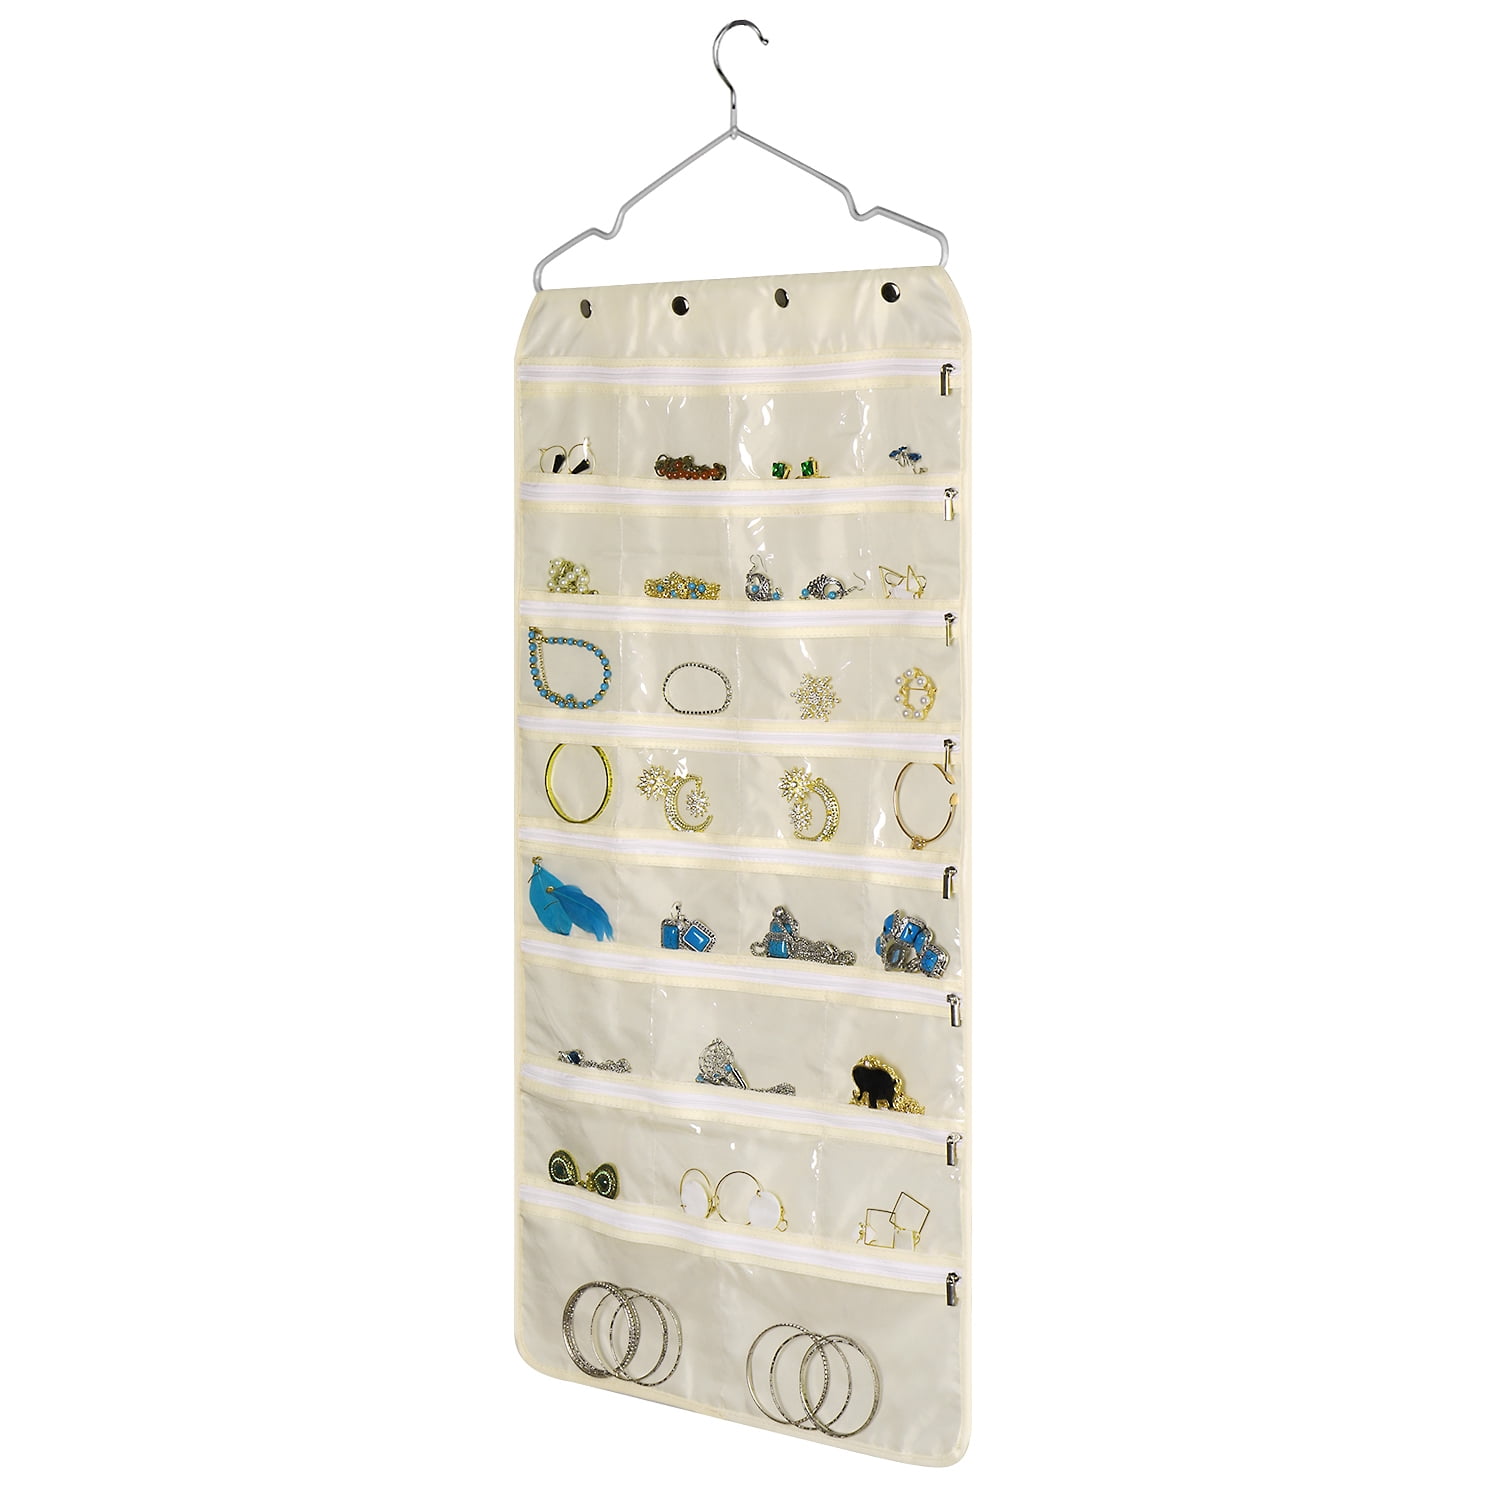 Flexzion Hanging Jewellry Organiser - 1 Pack Beige 56 Pockets with Zipper Dual Side Foldable Non-Woven Fabric Bag Earring Storage Clear Display Holder w/Hook for Necklace Bracelet Ring Accessories 